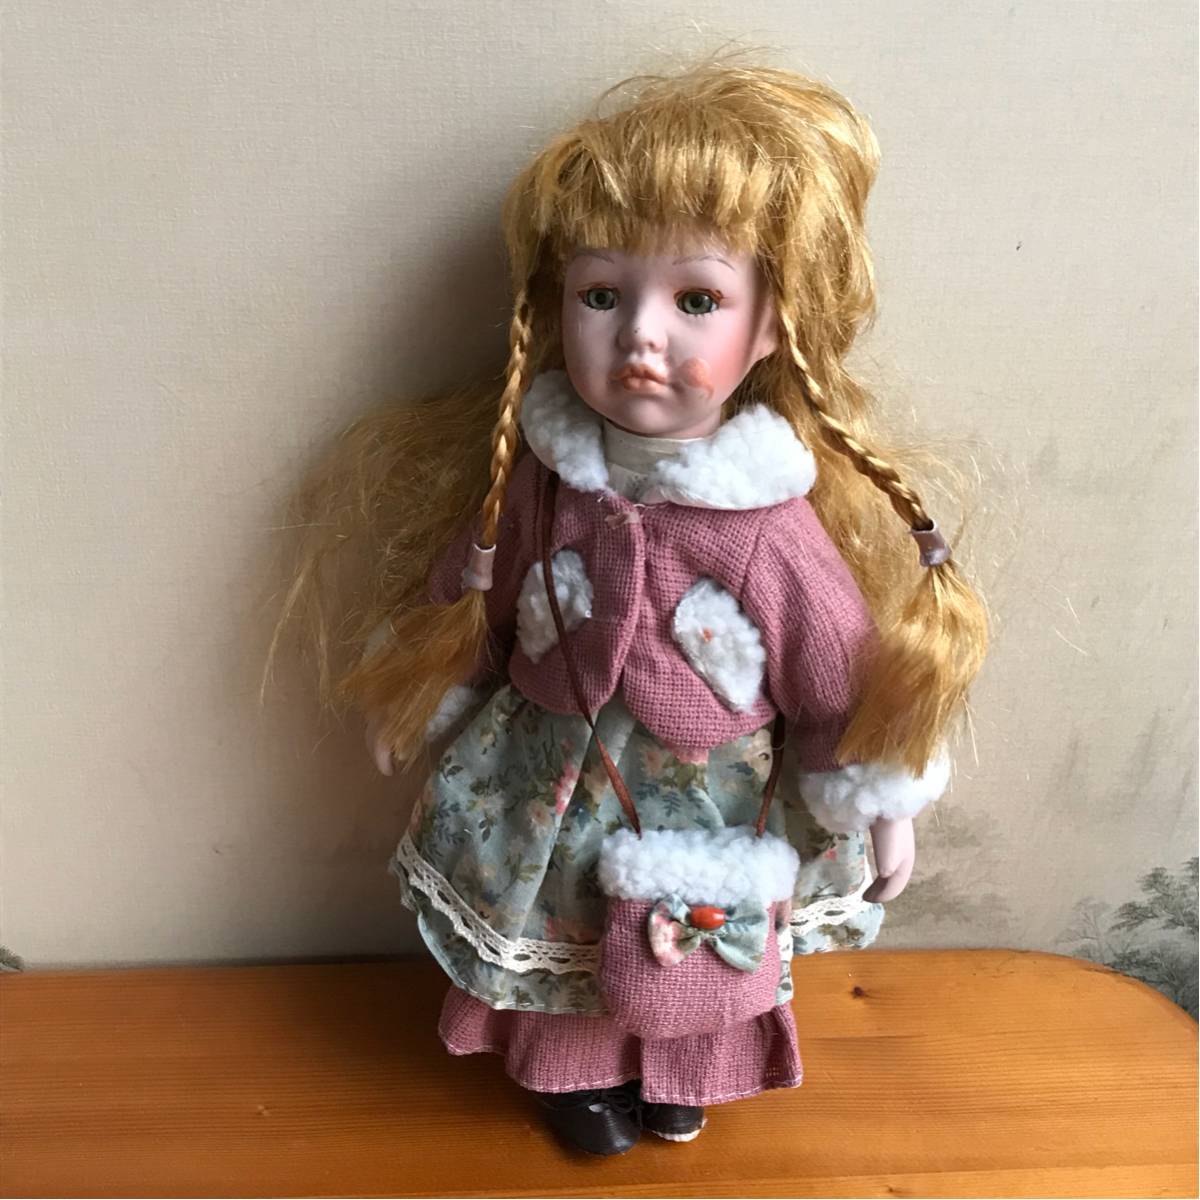  antique manner doll height approximately 31cm doll ceramics made. head . doll I hand ., pair .. ceramics made trunk body is cloth made?